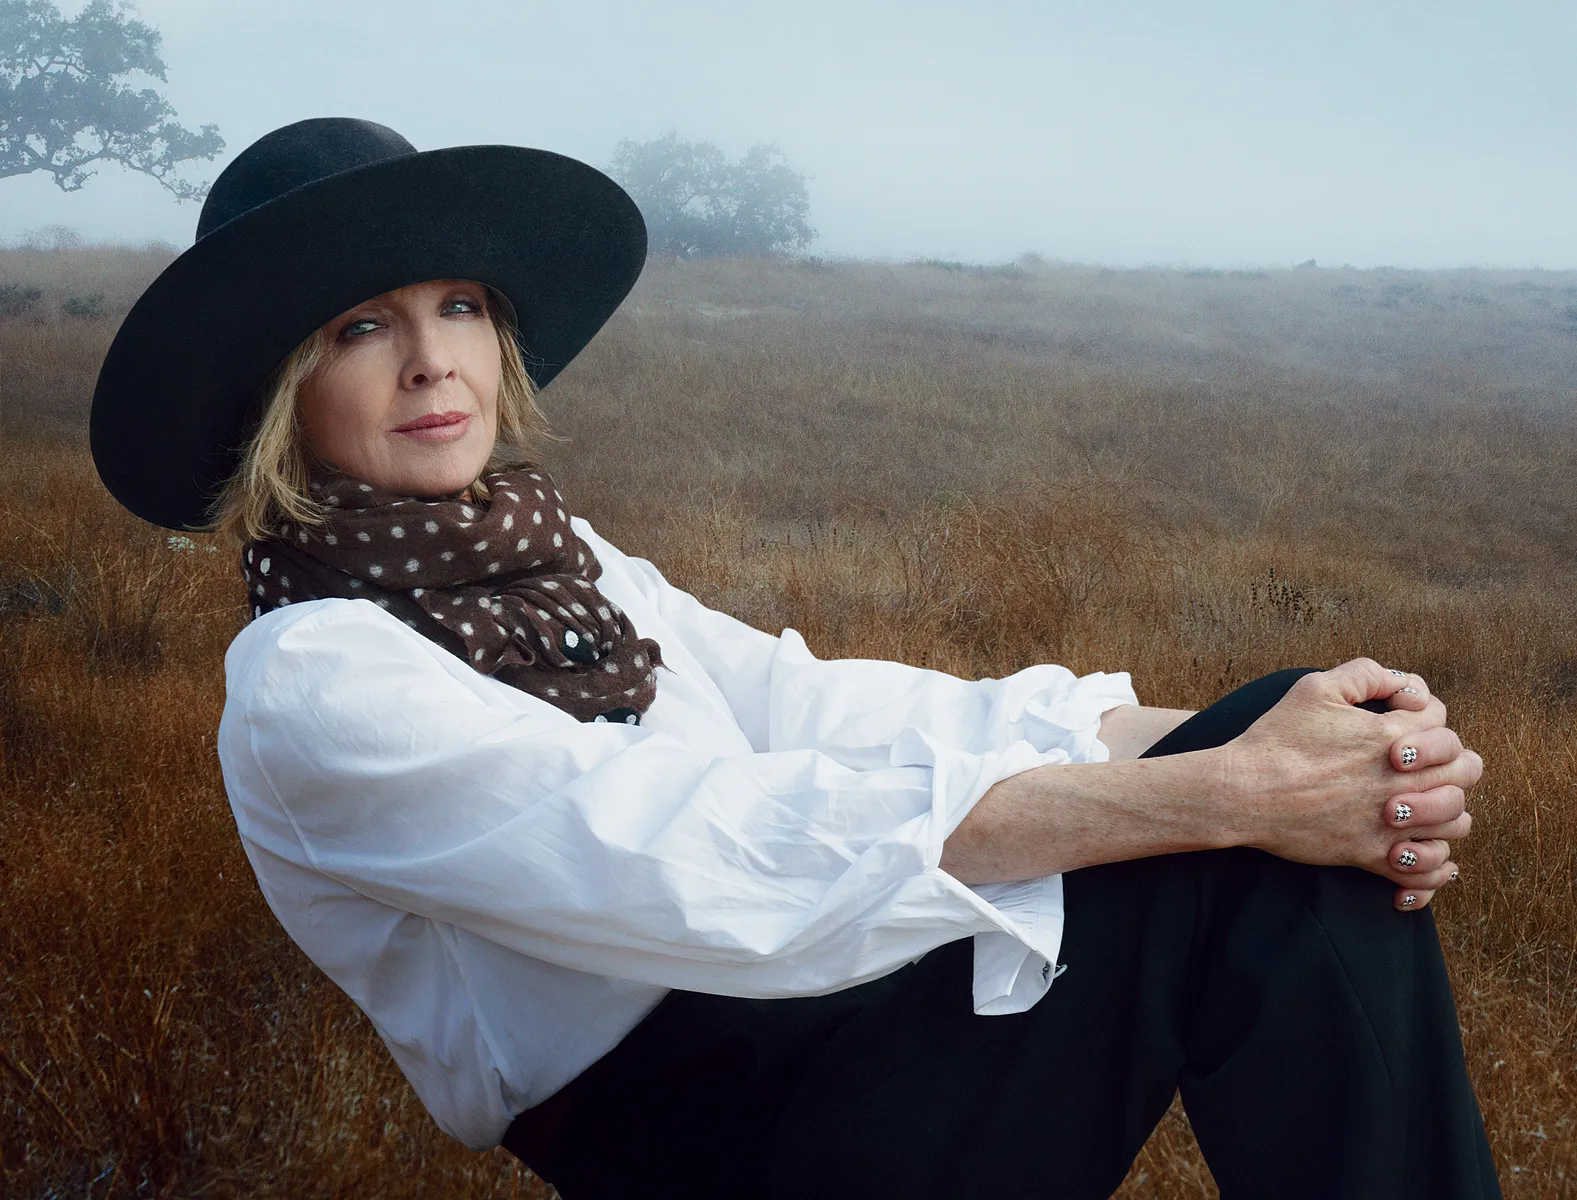 How Diane Keaton Landed Her Unexpected Role in 'The Godfather' and Changed Hollywood Forever